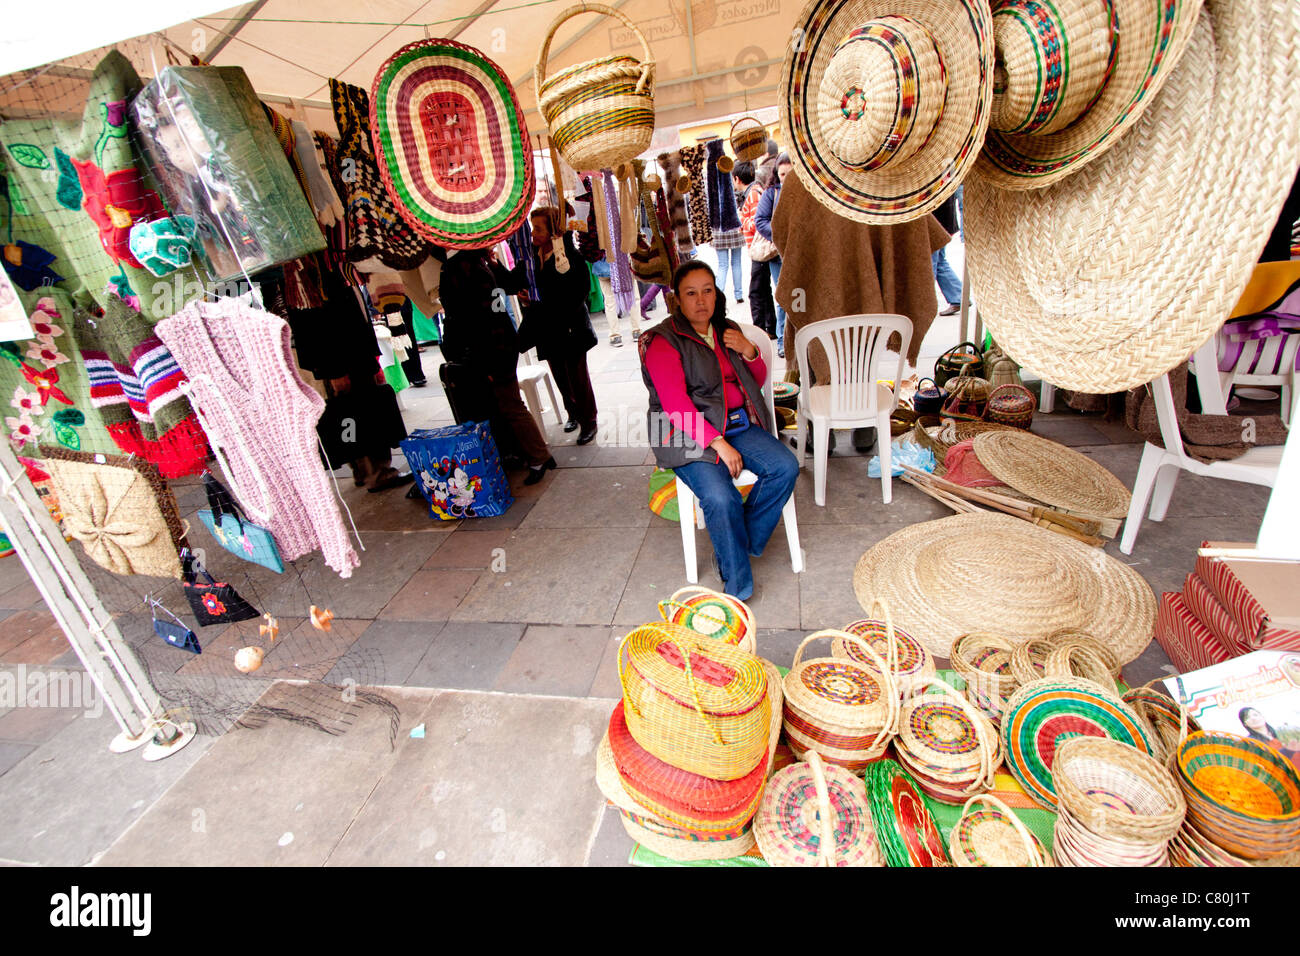 Penélope Descongelar, descongelar, descongelar heladas Portavoz Woman selling traditional handmade clothes, hats and bags in the  marketplace. Tunja, Boyacá, Colombia, South America Stock Photo - Alamy